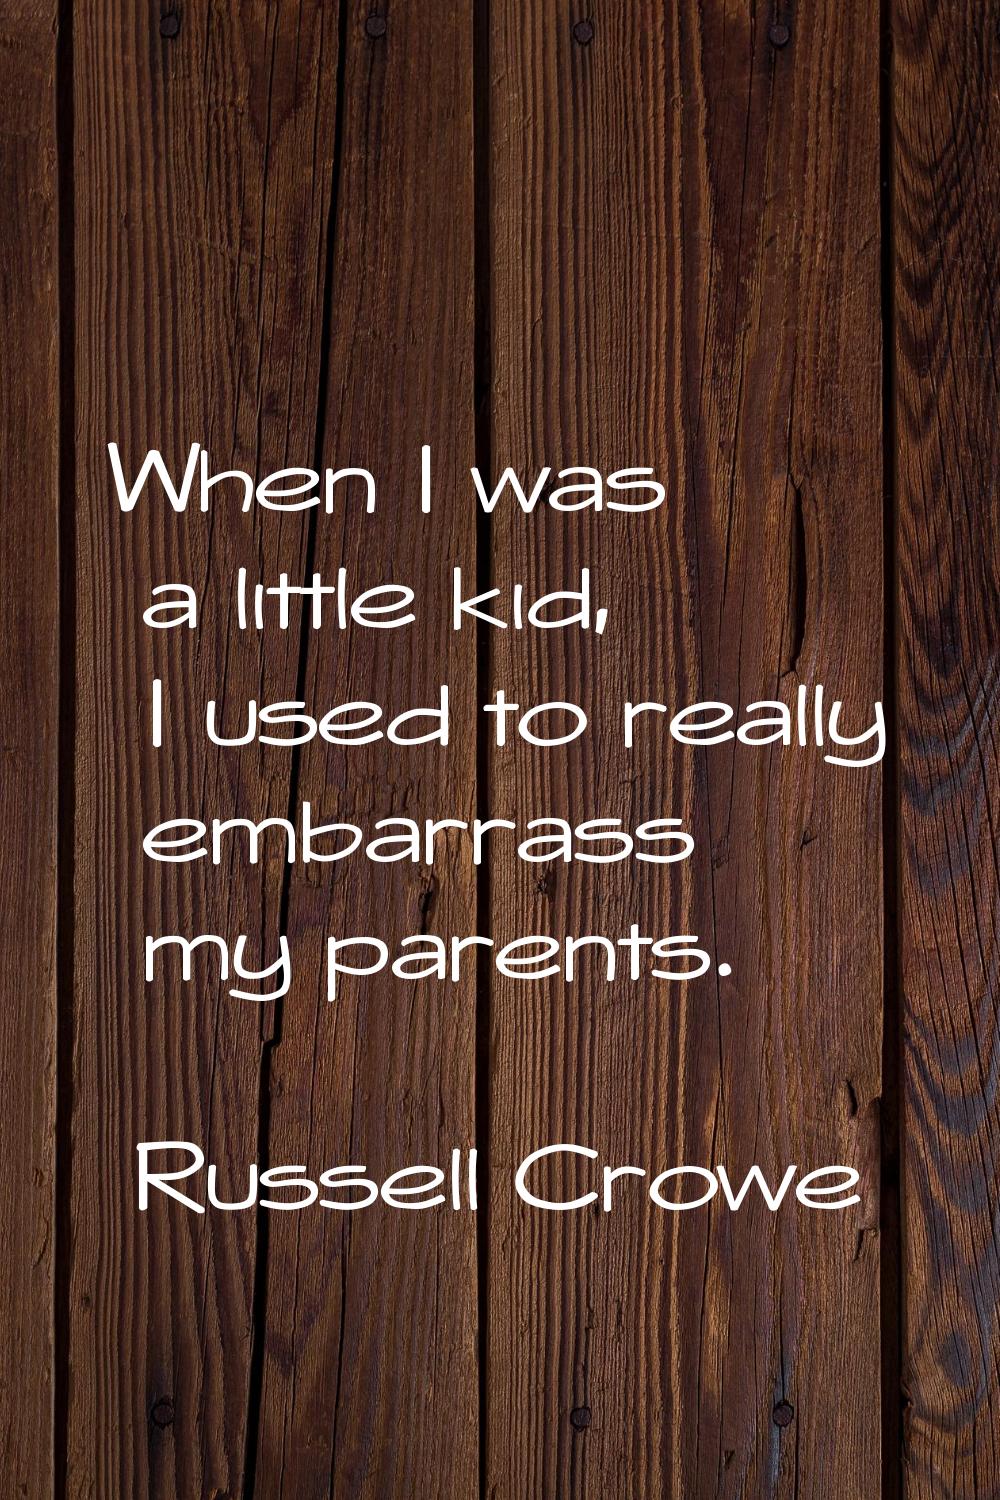 When I was a little kid, I used to really embarrass my parents.